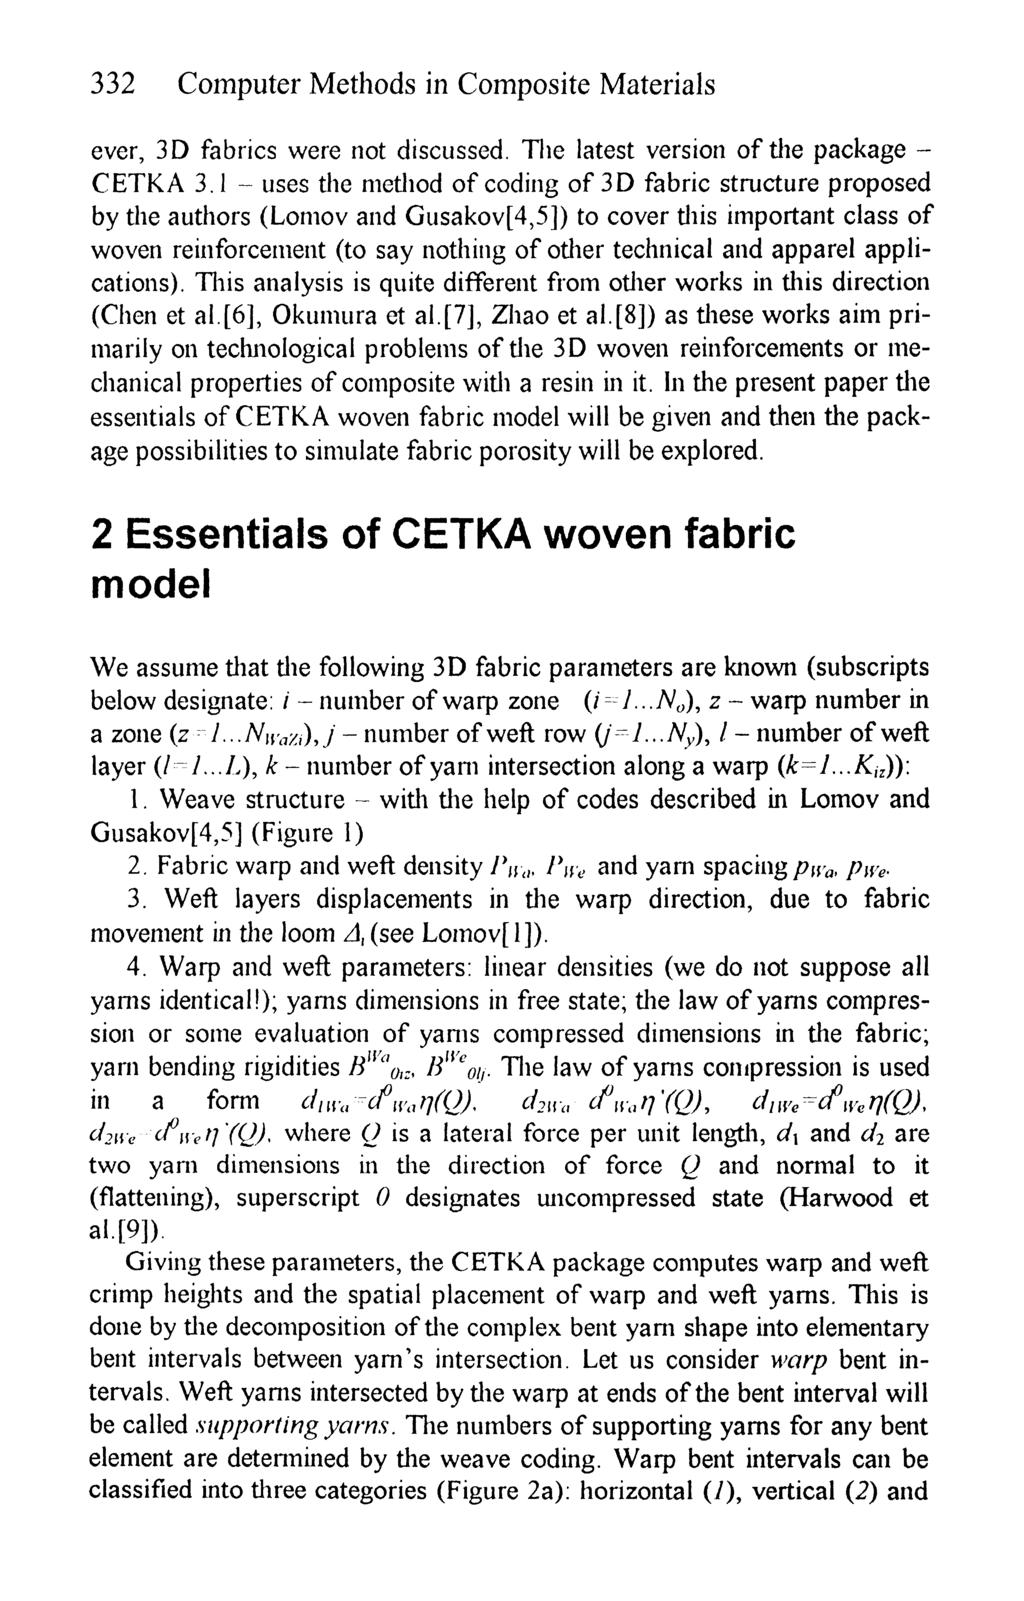 332 Computer Methods in Composite Materials ever, 3D fabrics were not discussed. The latest version of the package - CETKA 3.